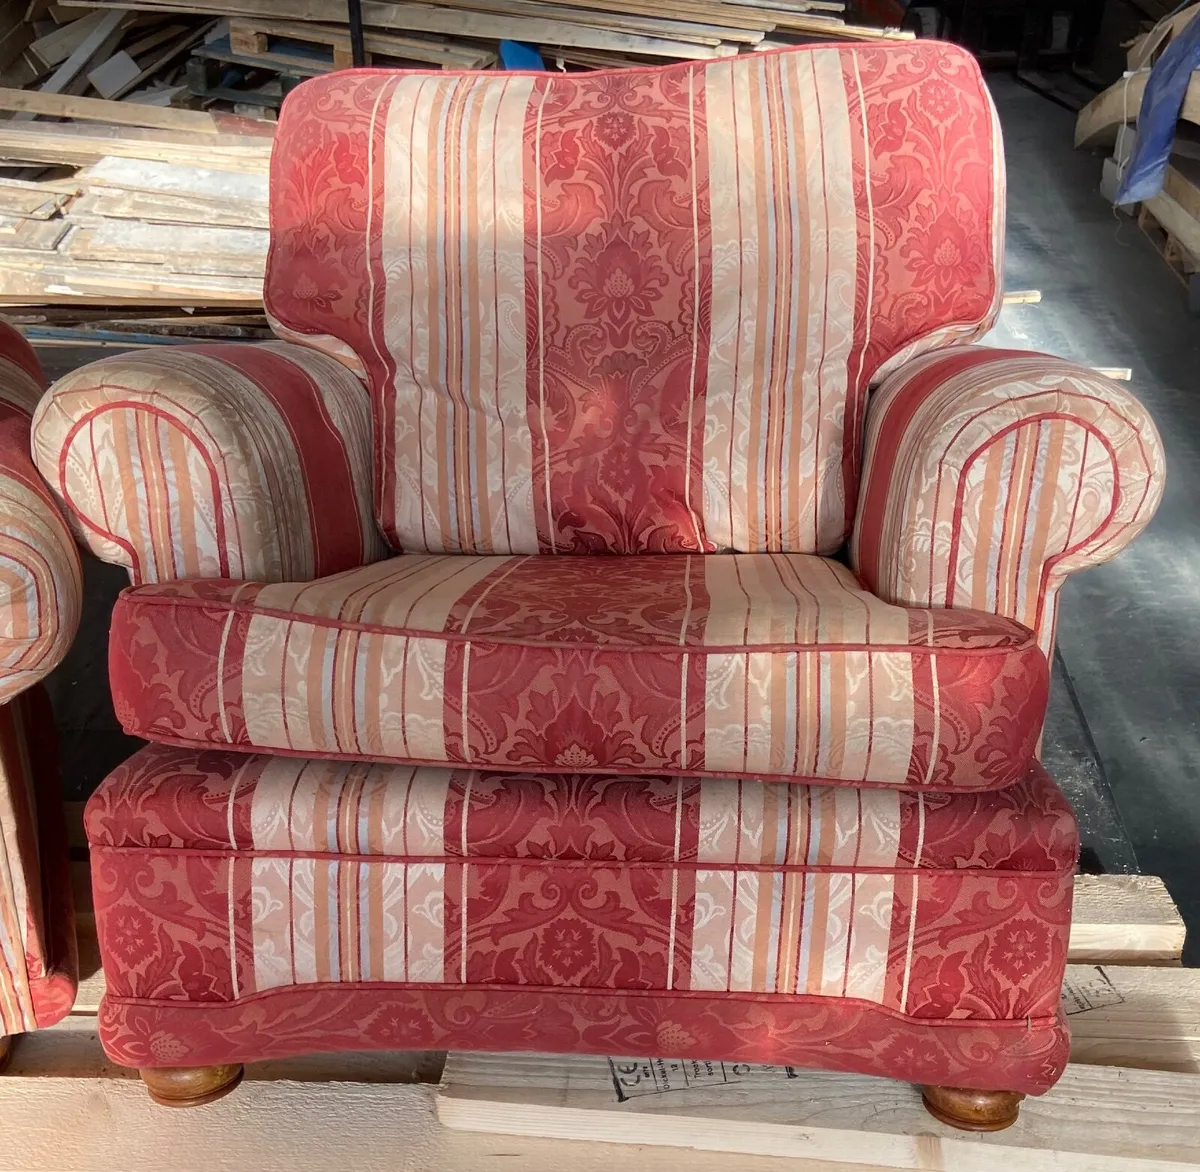 Pair of armchairs - Image 1